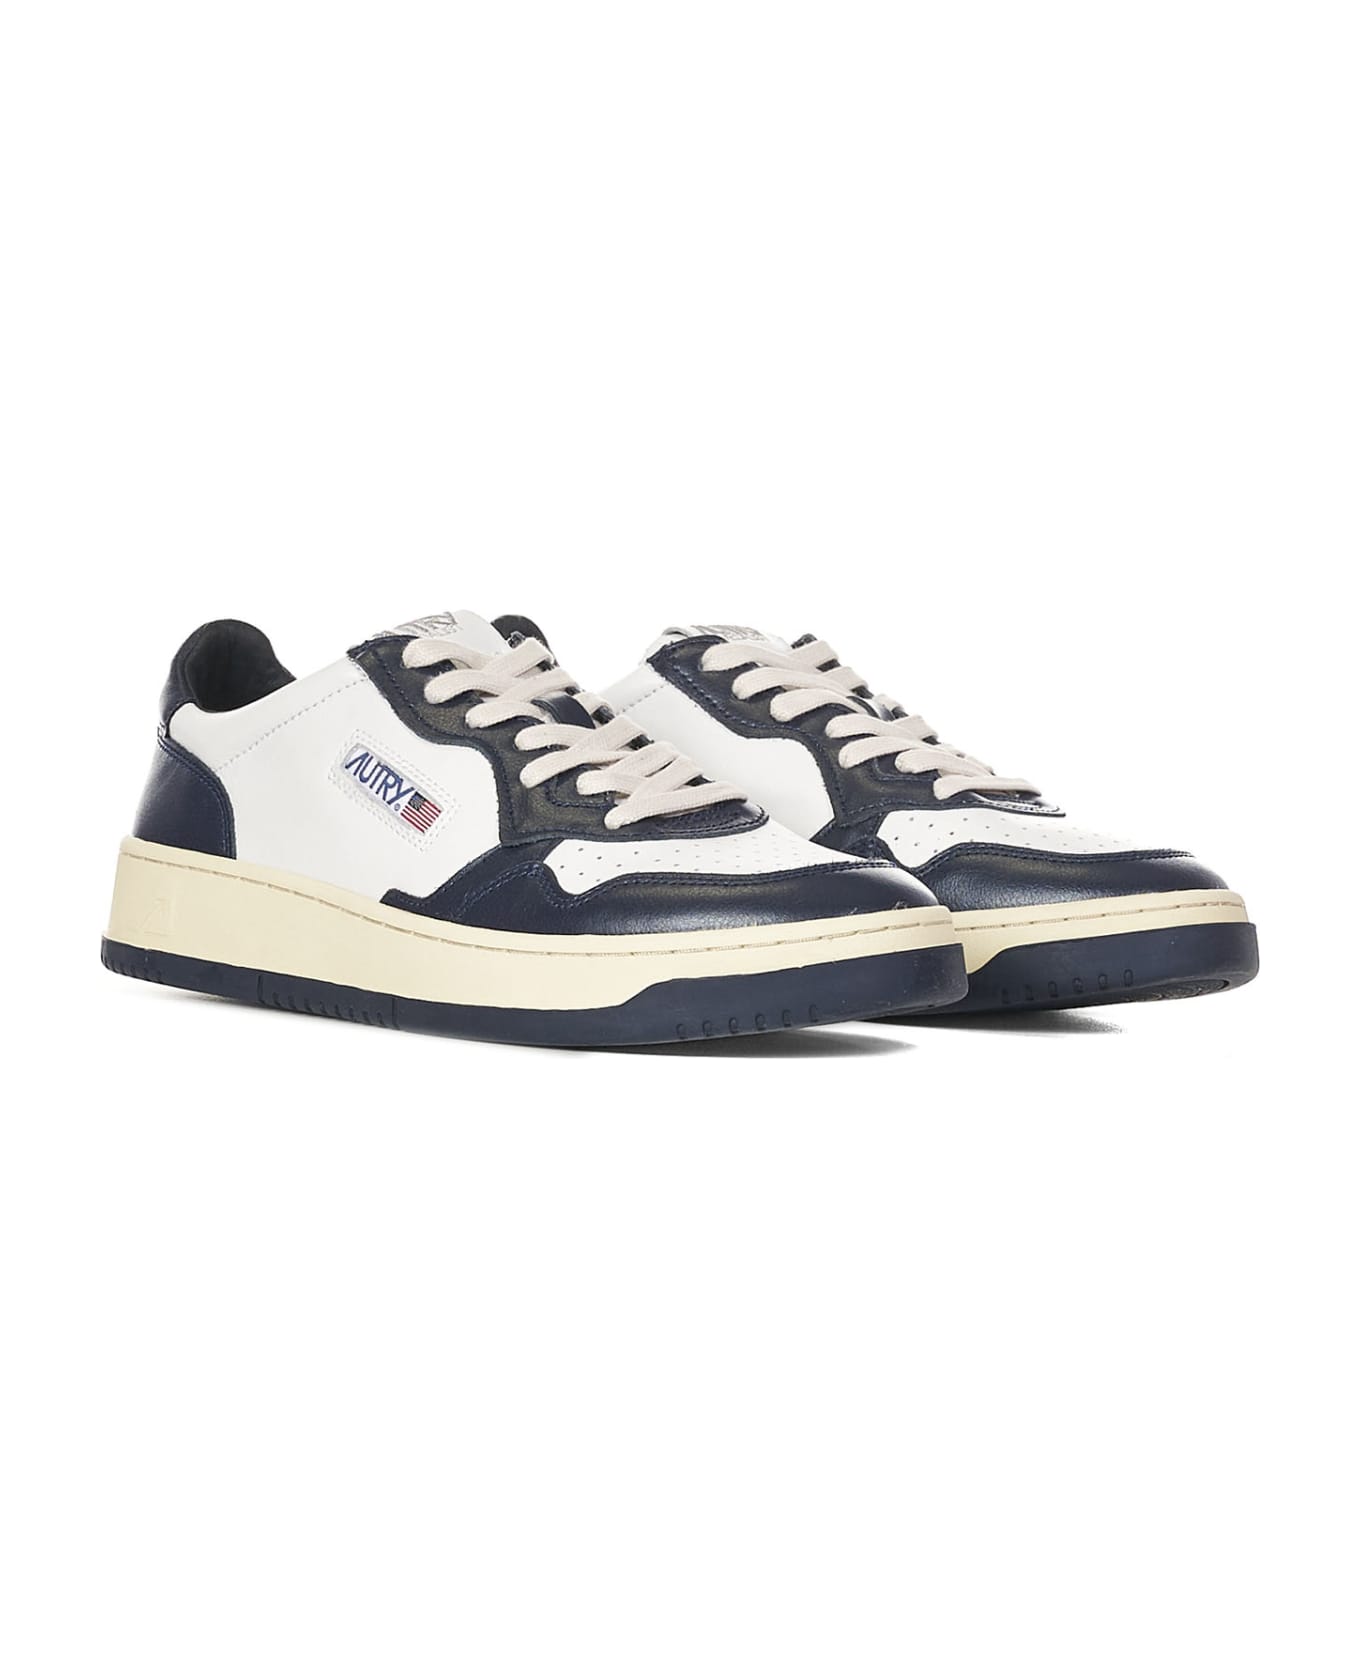 Autry Action Medalist 1 Low Sneakers - Blue